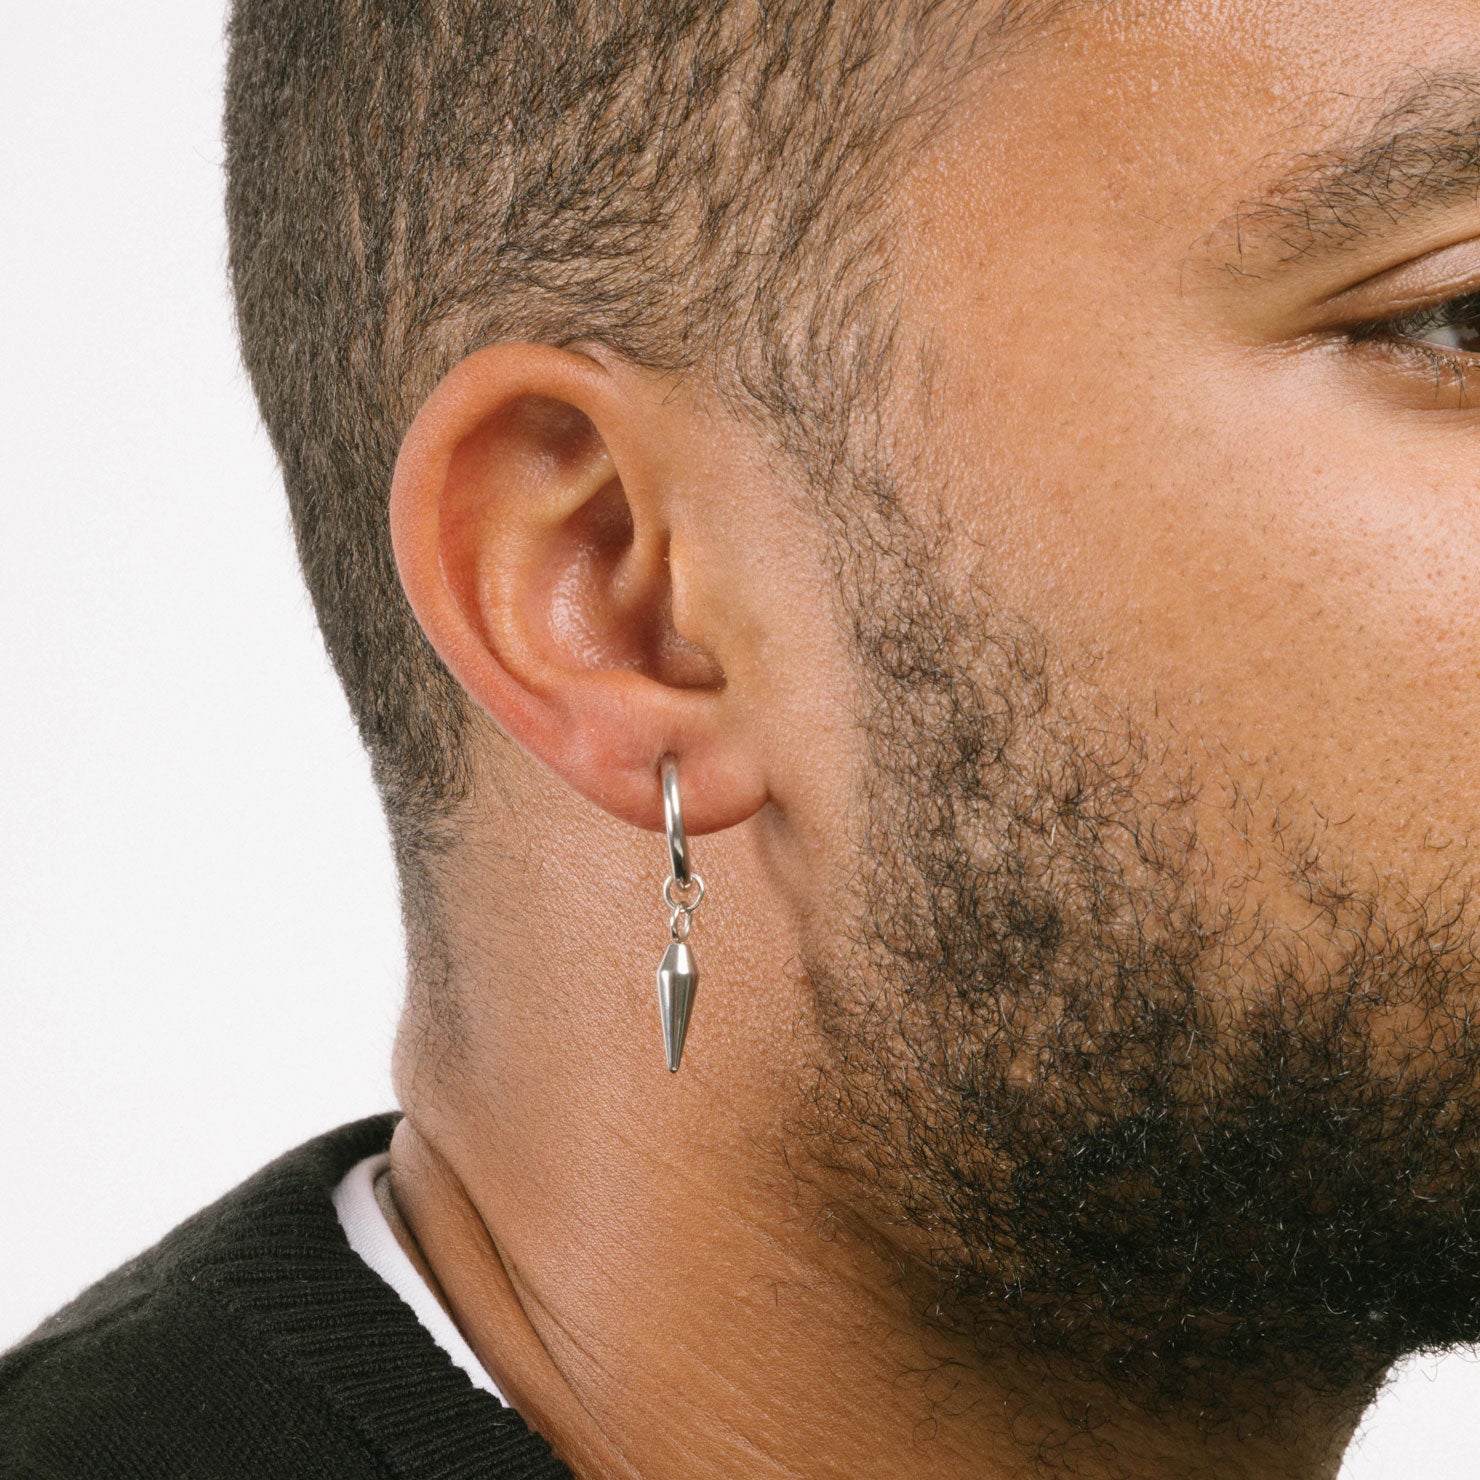 This set of three pairs of clip-on earrings for men features a secure sliding spring closure that best accommodates individuals with smaller or thinner earlobes. The average comfortable wear duration is approximately 2-4 hours, and the hold strength will remain very secure. The earrings are able to adjust to your ear thickness, and the materials are stainless steel. Included are a pair of dagger clip-on earrings, bar clip-on earrings, and classic hoop clip-on earrings (silver).